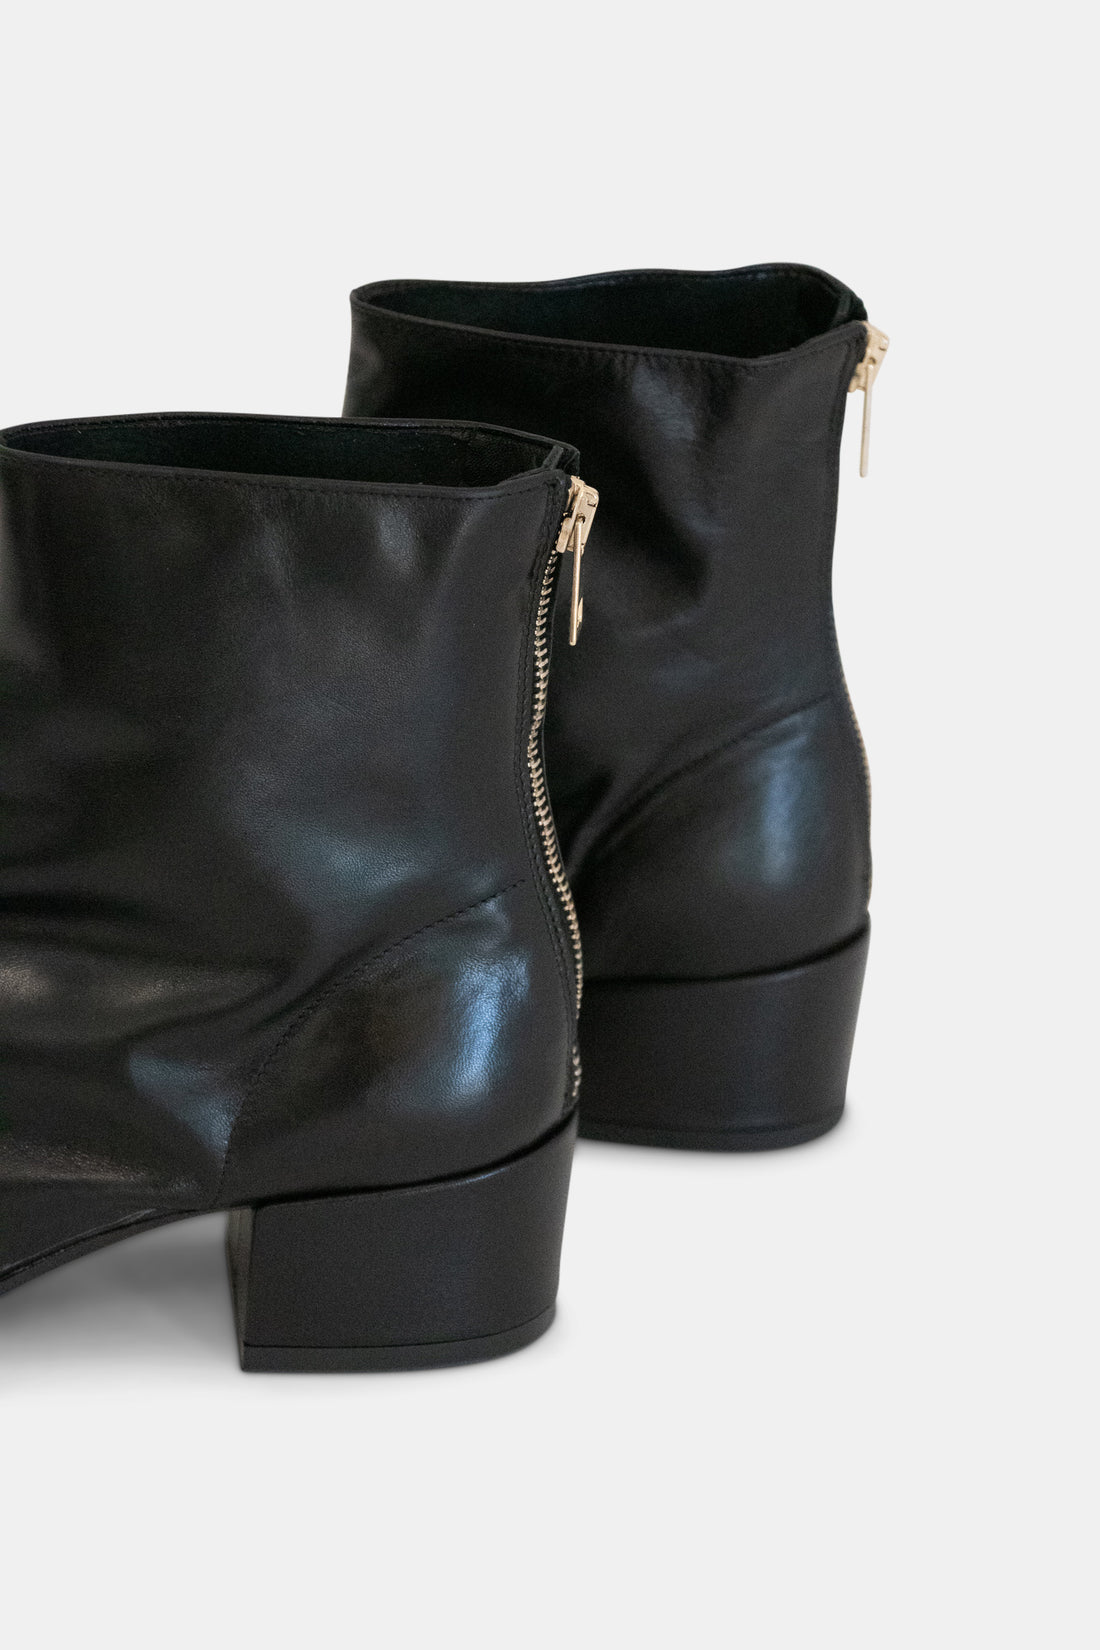 Unlined Round Toe Bootie Black - Sample Size 37